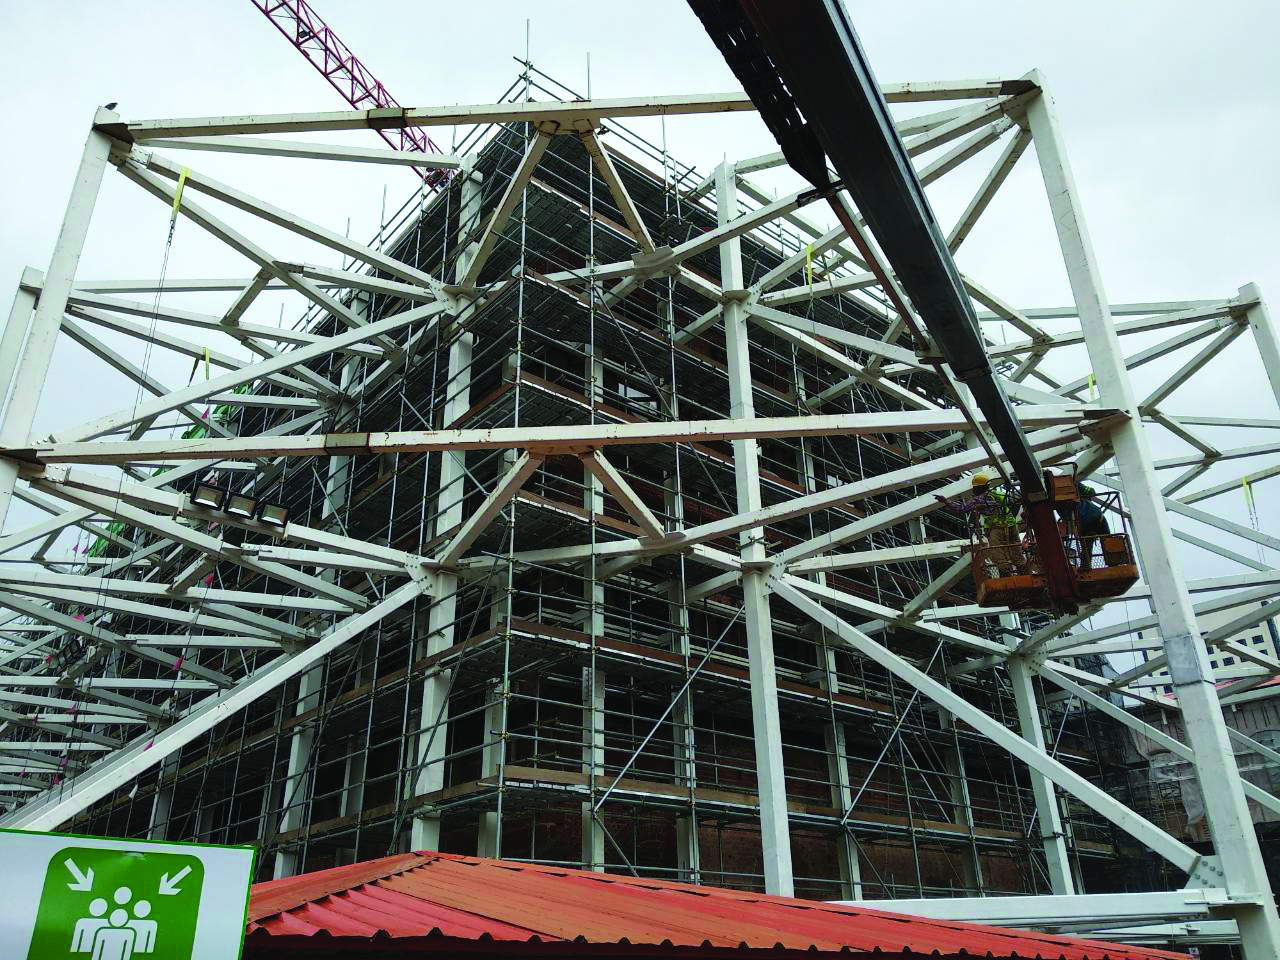 Things about load-bearing steel frame structures